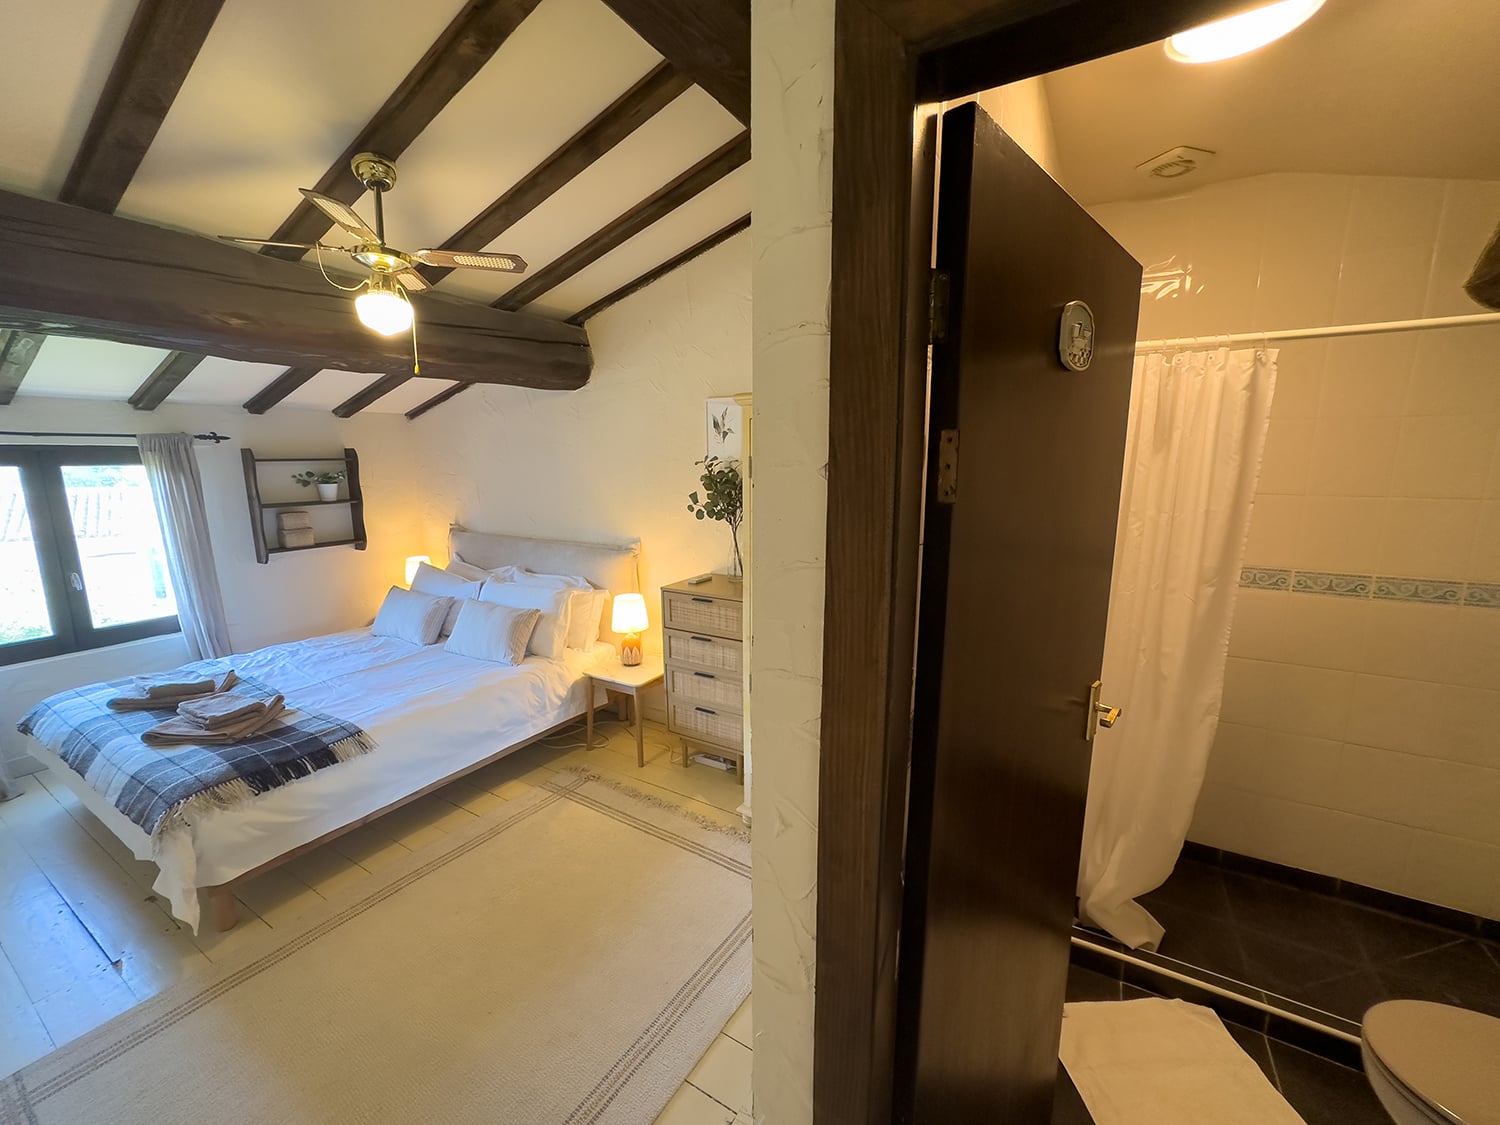 Bedroom and bathroom | Holiday home near Fanjeaux